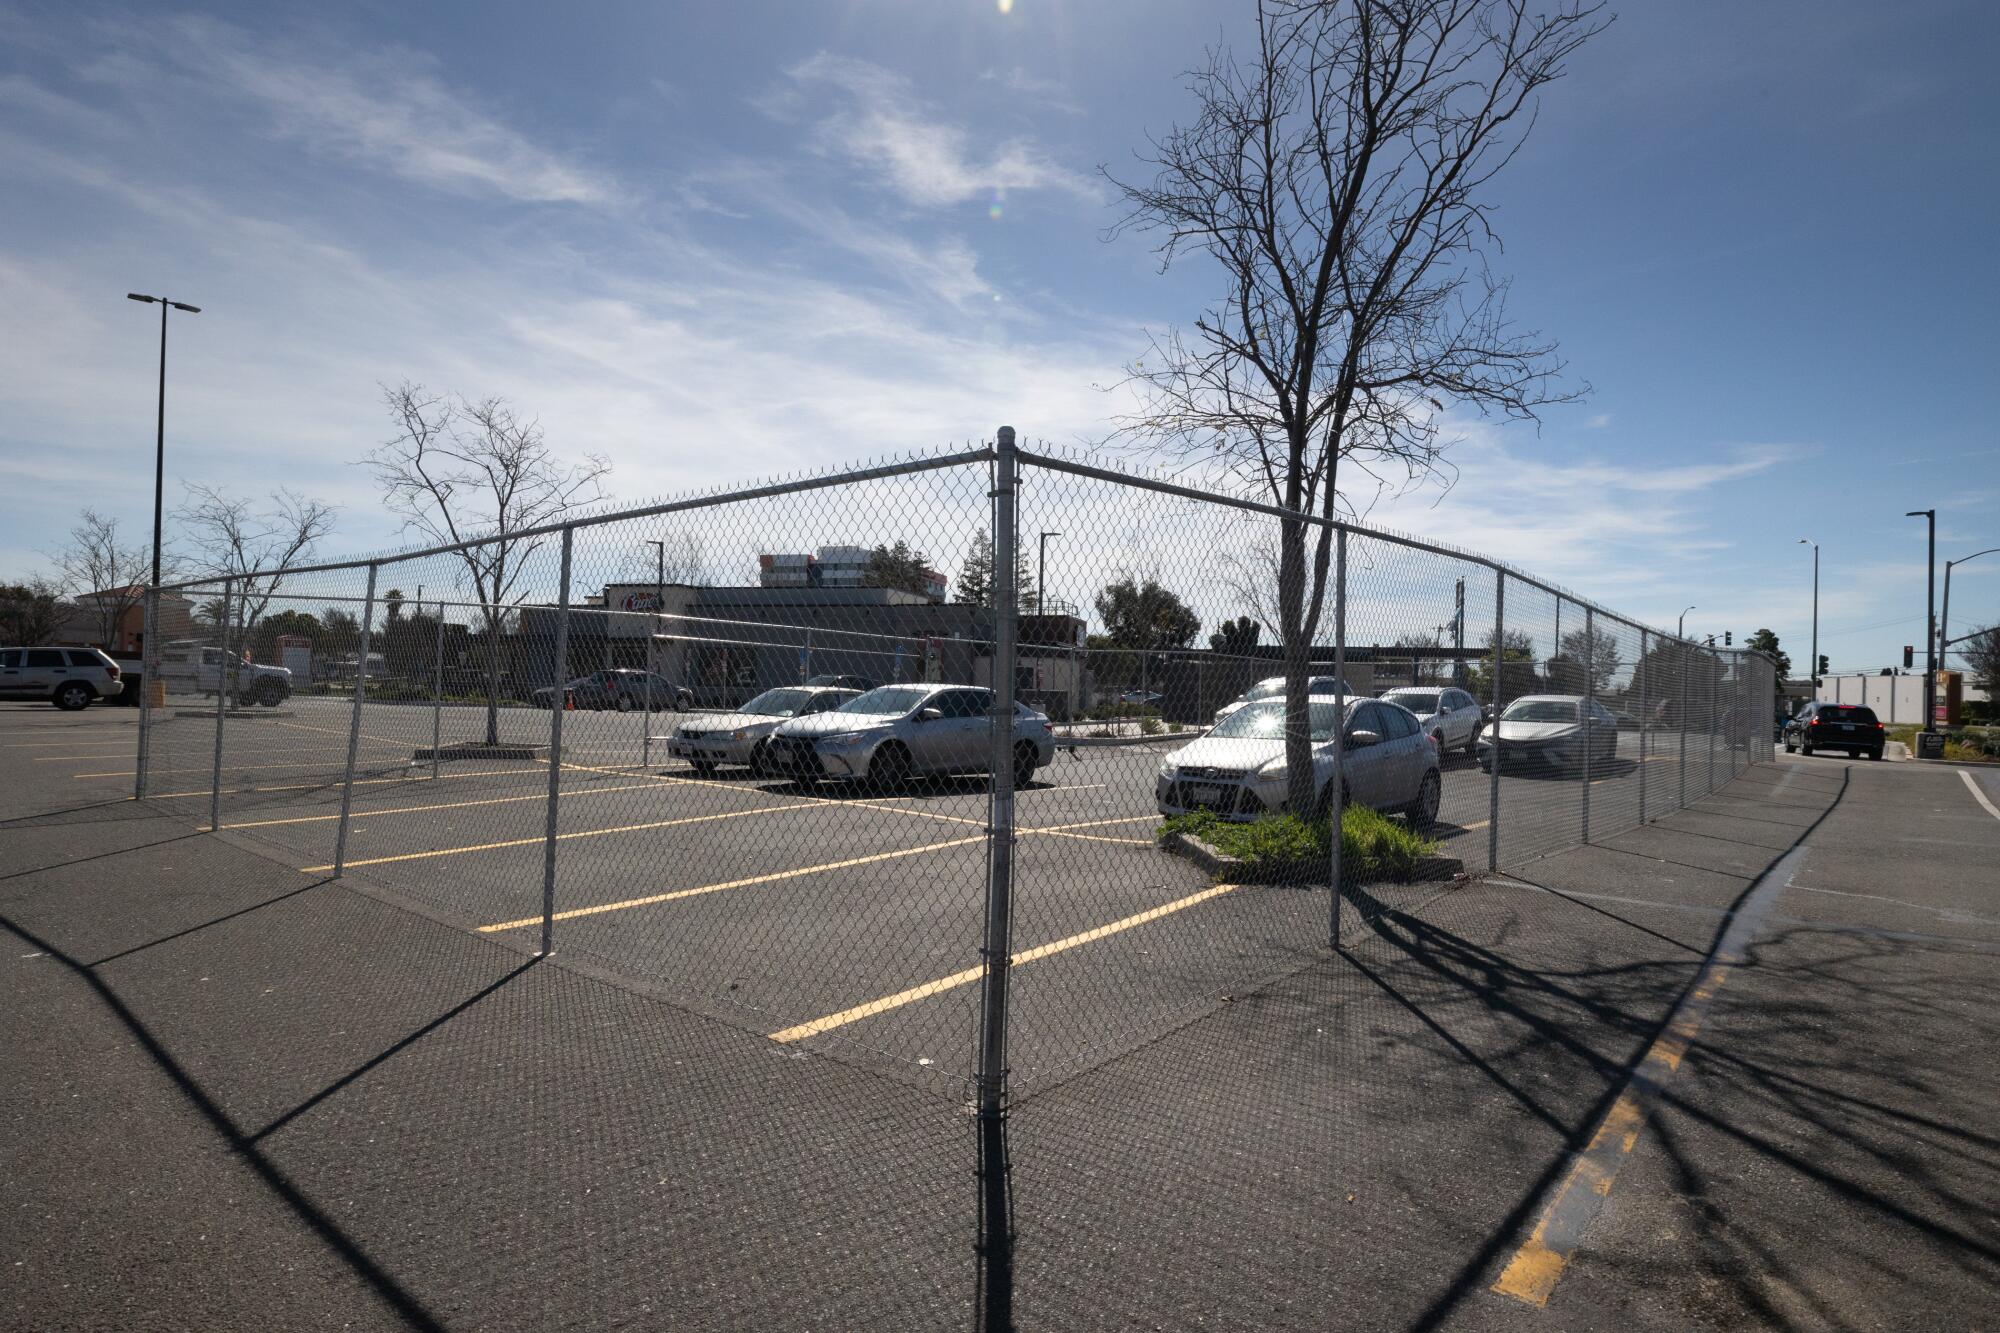 Tall chain-link fencing surrounds part of a parking lot with several cars and additional empty parking spaces